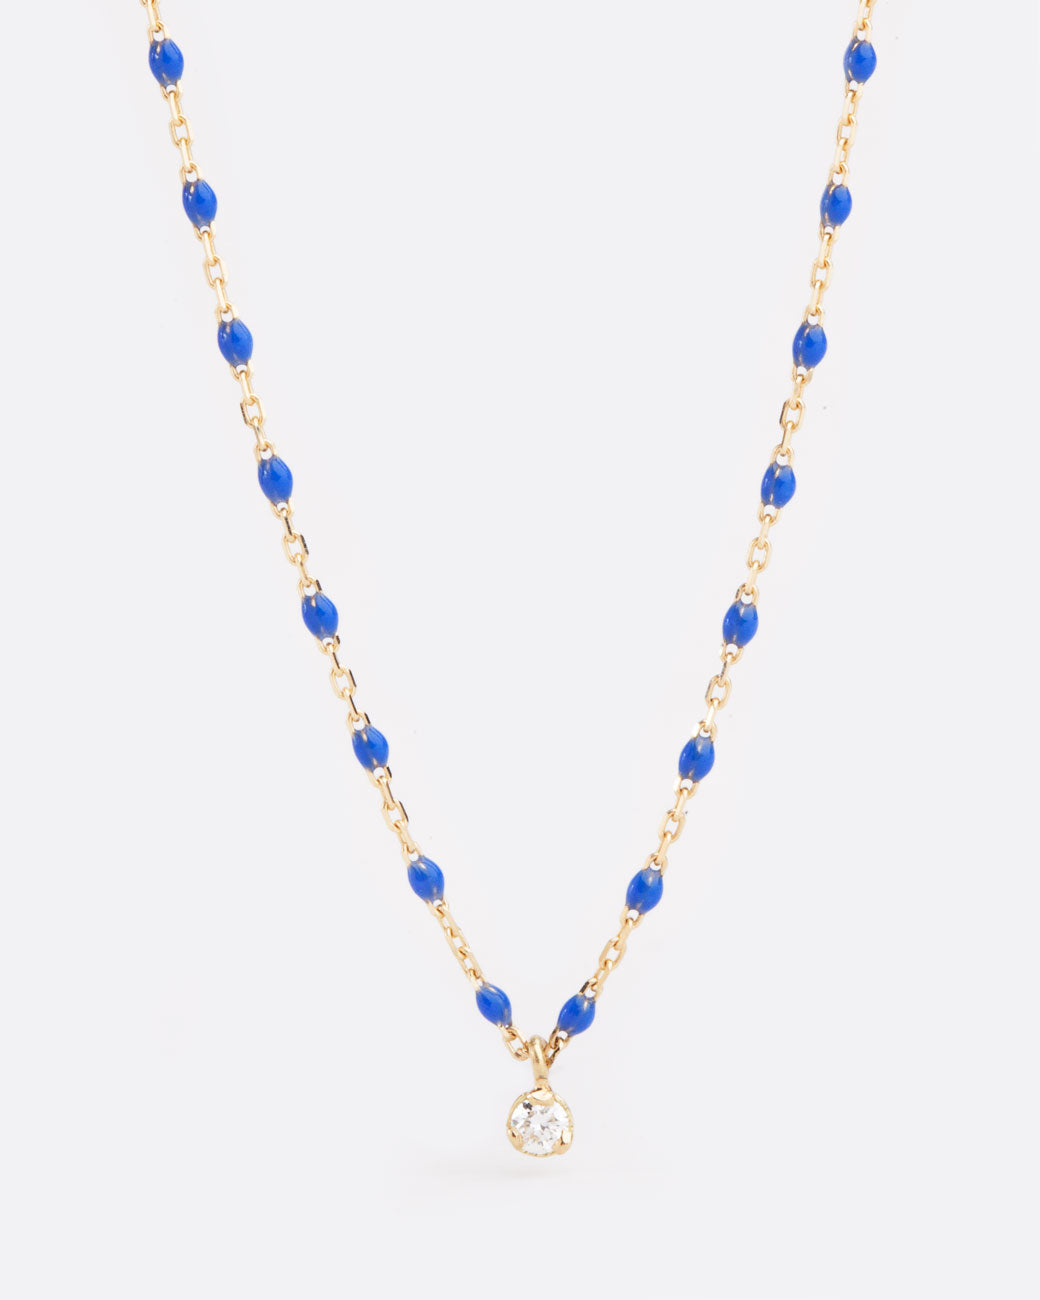 Close up birds eye view of yellow gold chain necklace with small blue resin beads with single diamond pendant